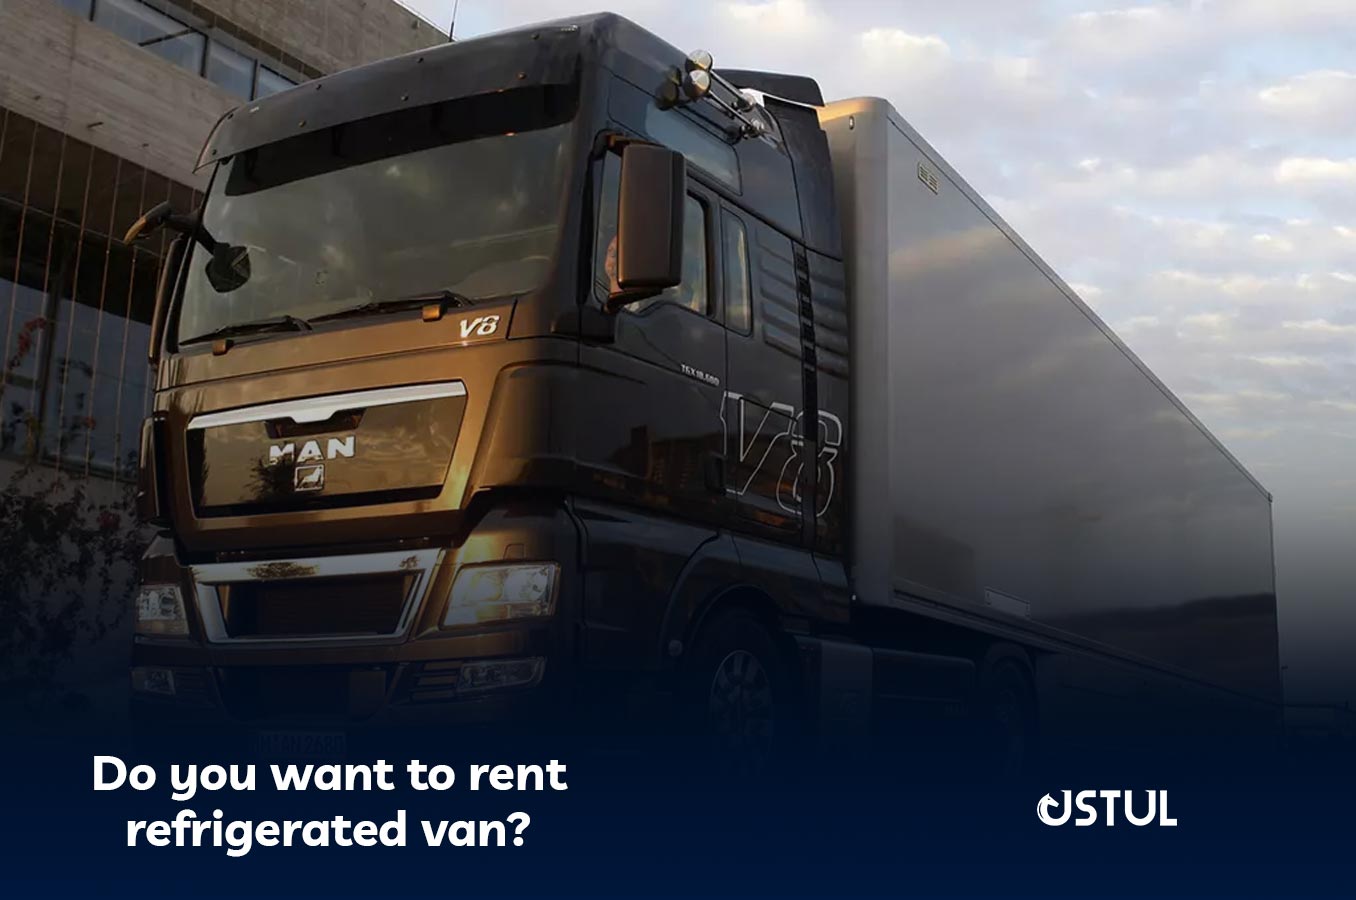 Do you want to rent refrigerated van?